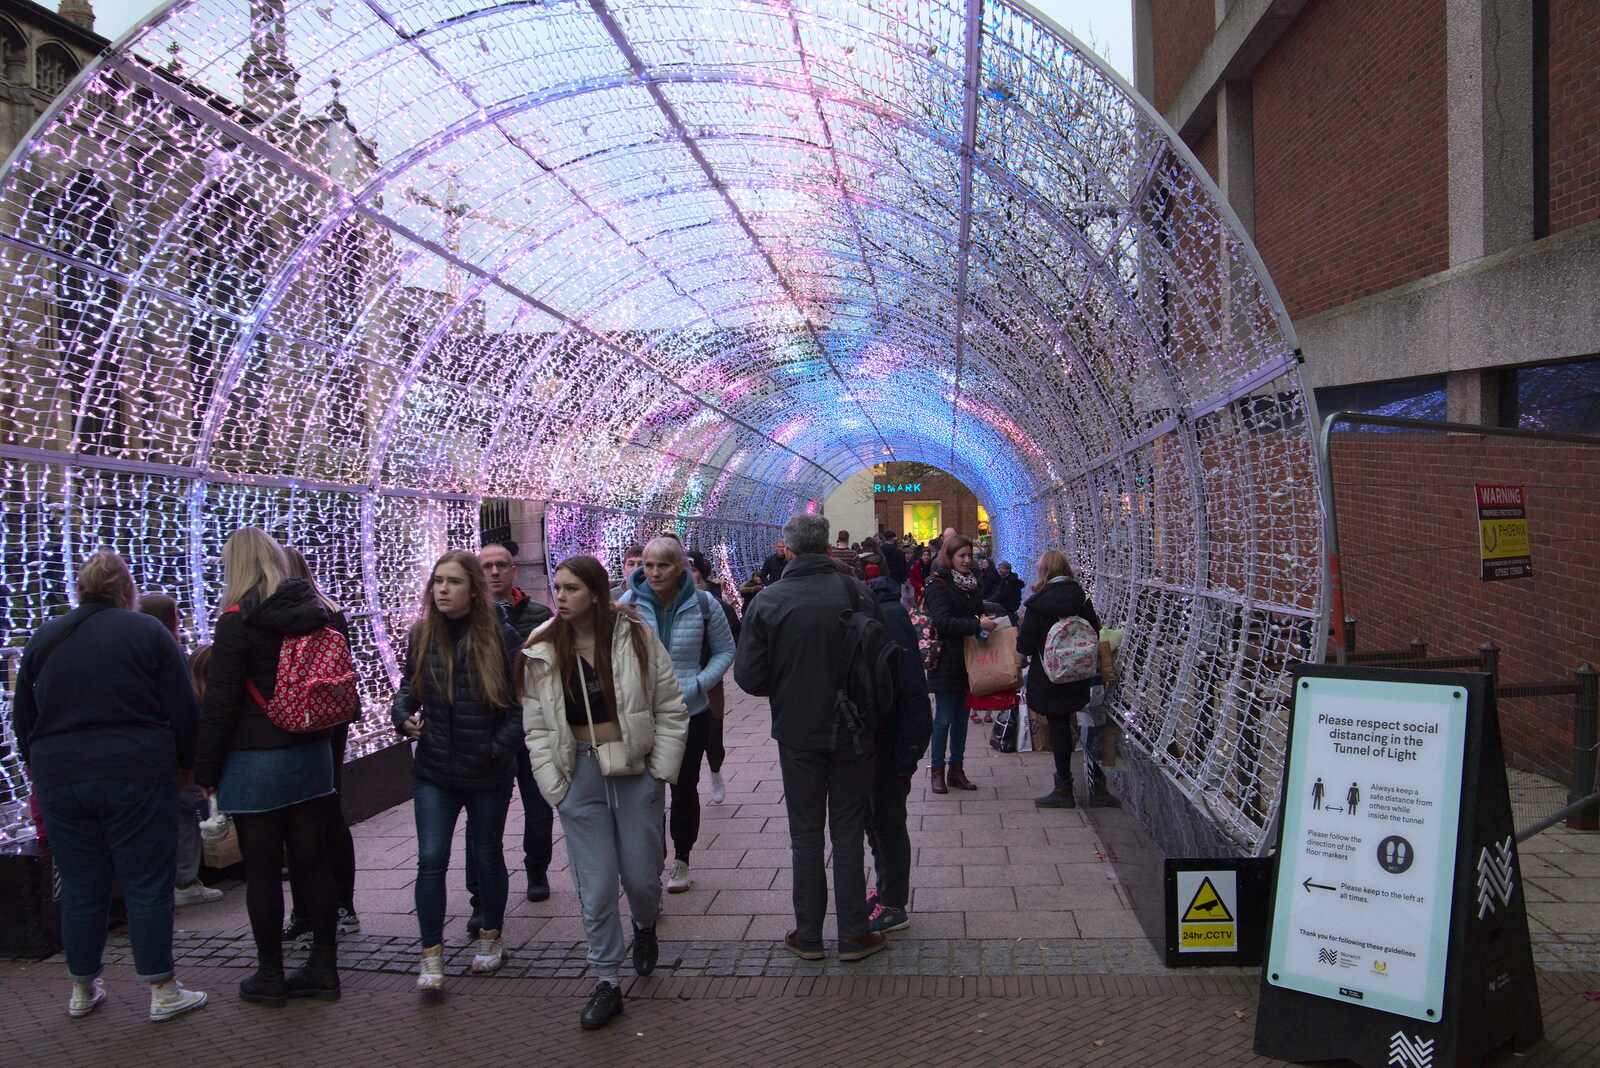 The Norwich light tunnel from Norwich Lights and a Village Hall Jumble Sale, Brome, Suffolk - 20th November 2021